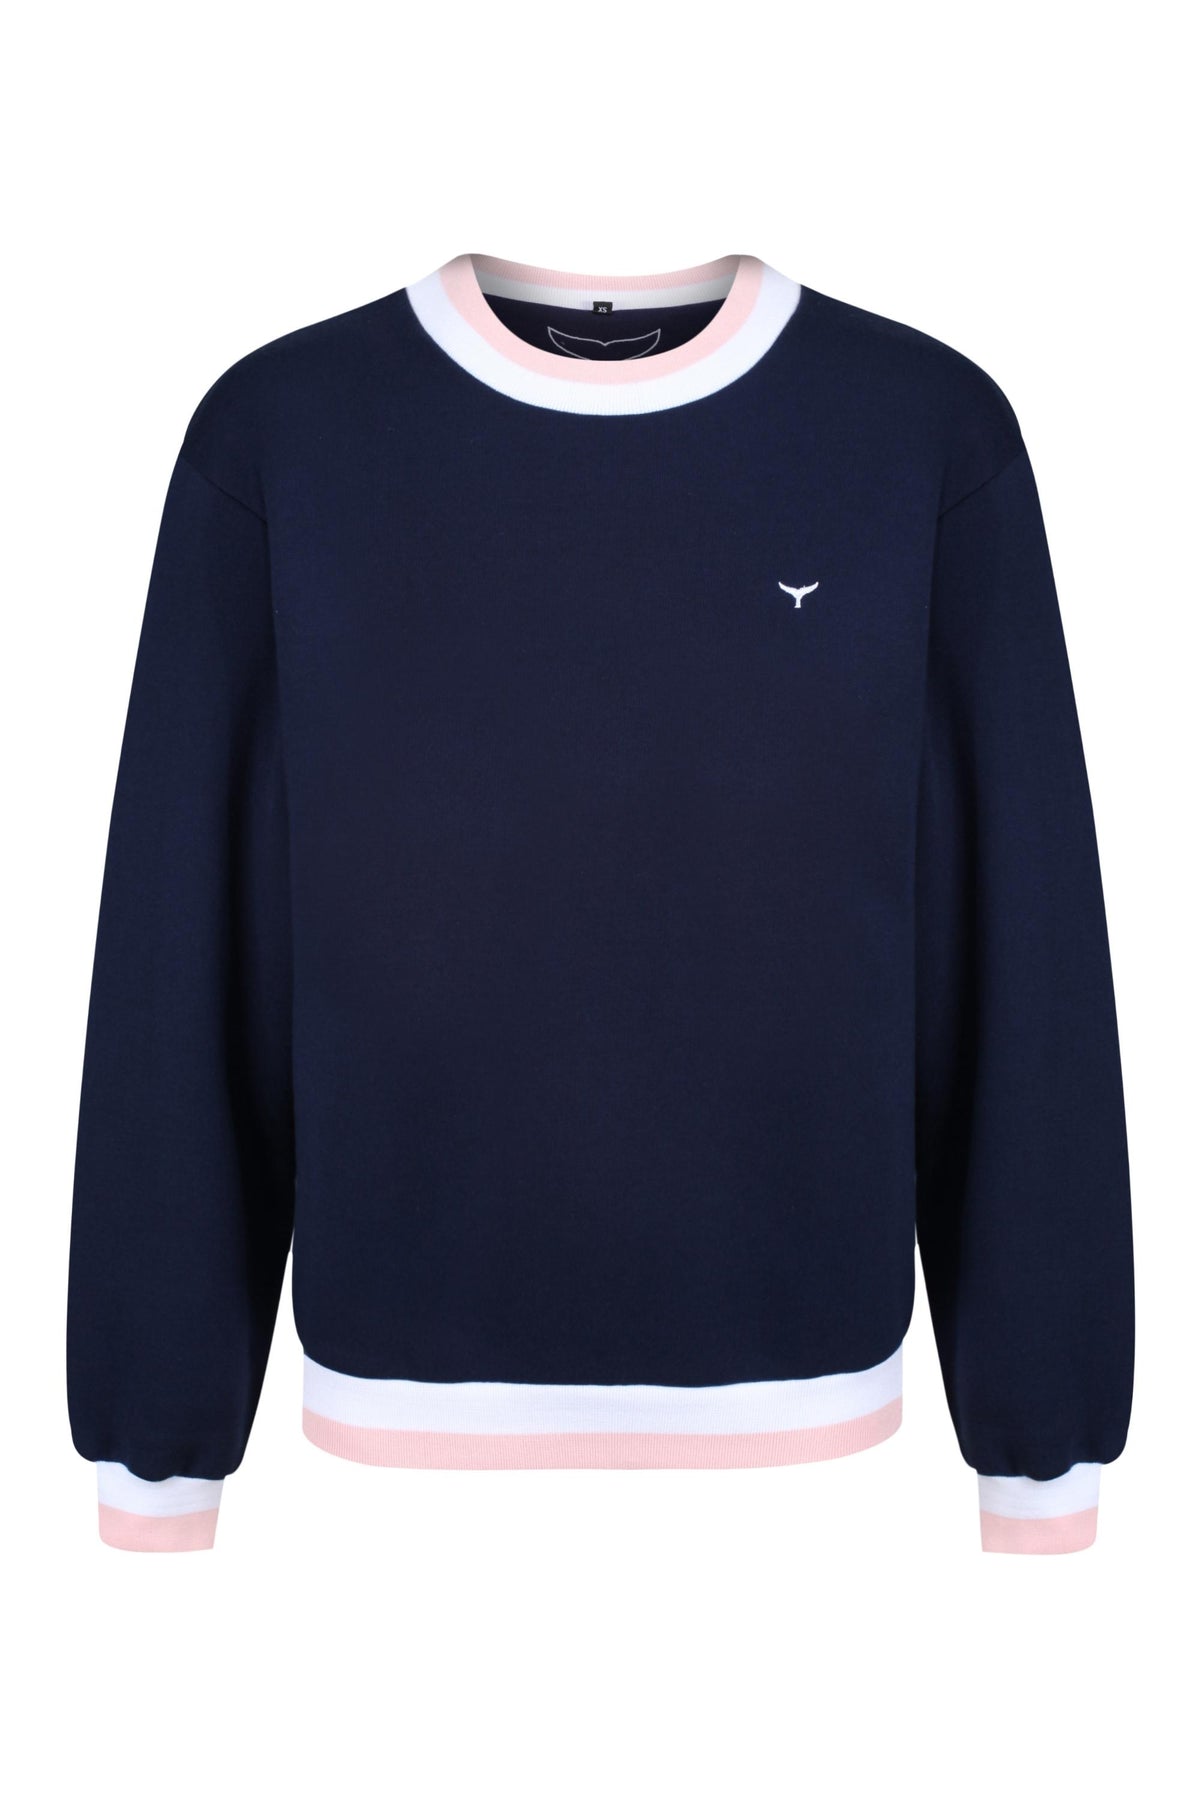 Southwold Unisex Sweatshirt - Navy - Whale Of A Time Clothing